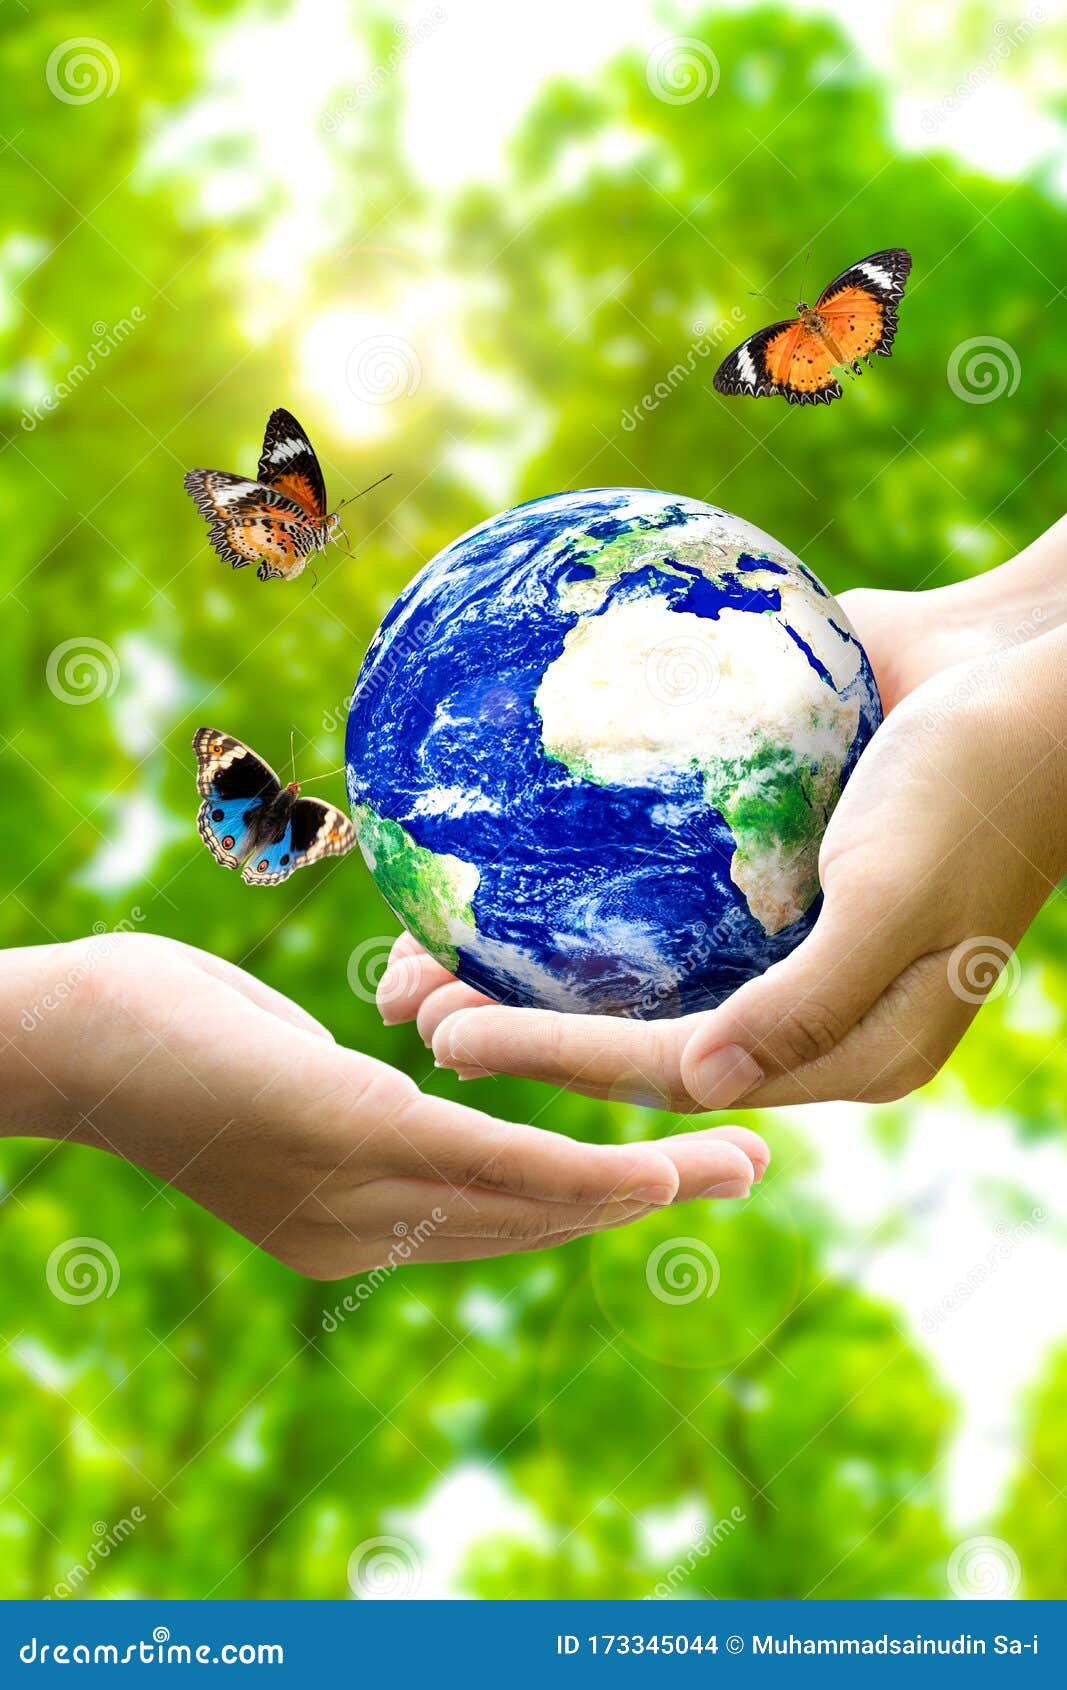 Woman Hands Holding World or Globe Give To Another Hand with Butterfly ...